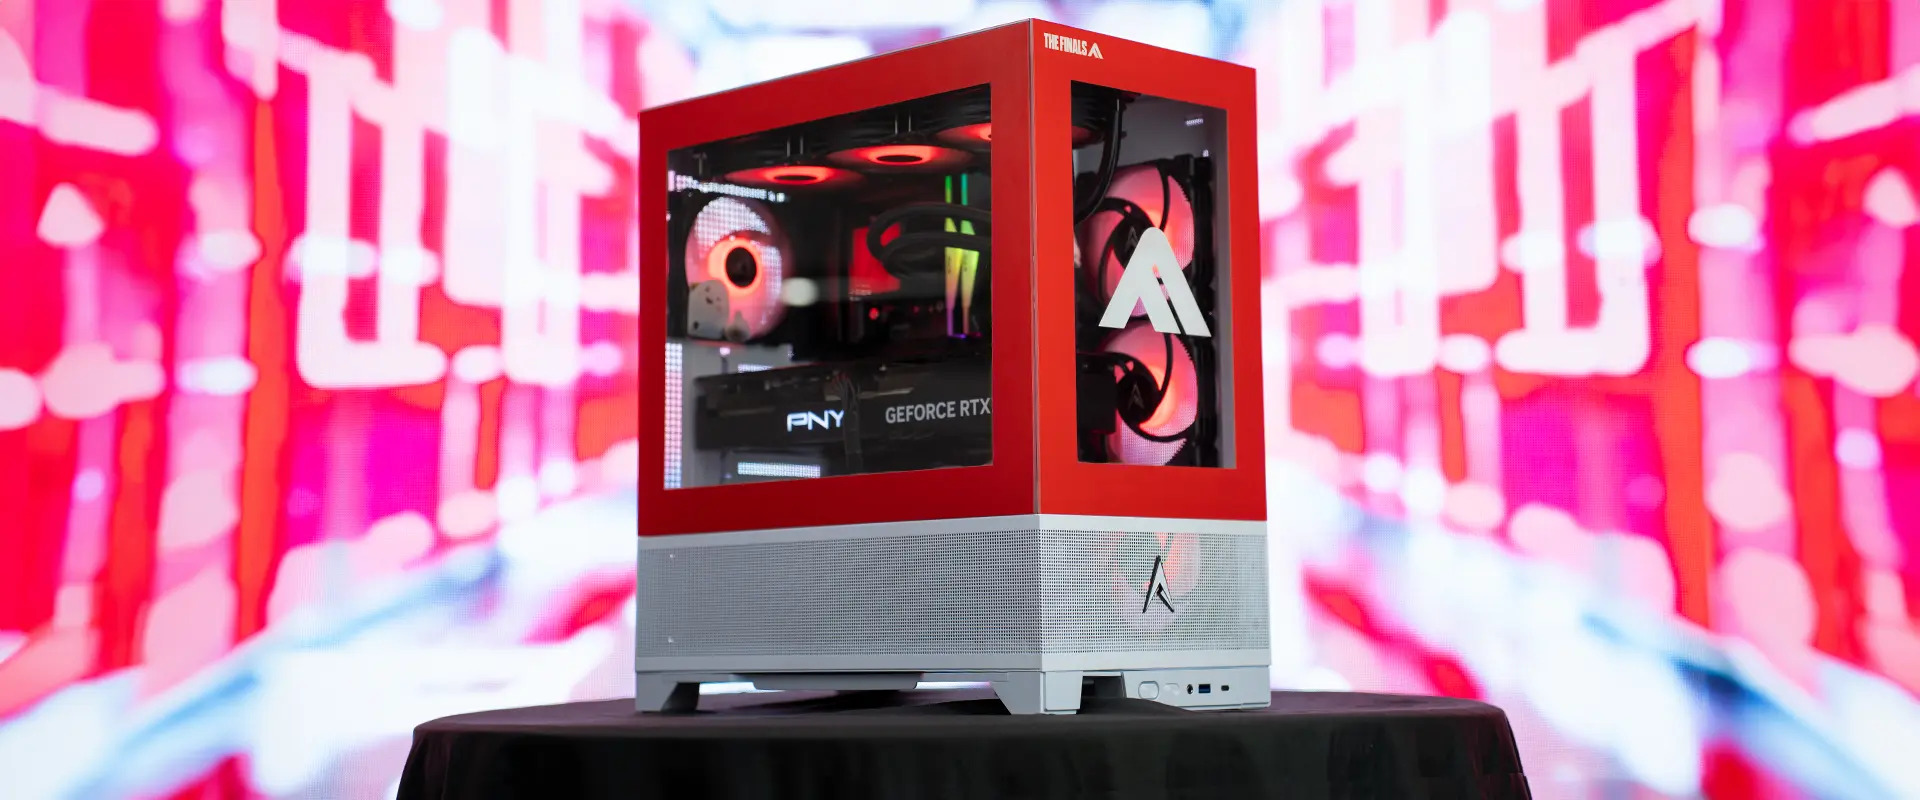 Allied x The Finals PC Giveaway